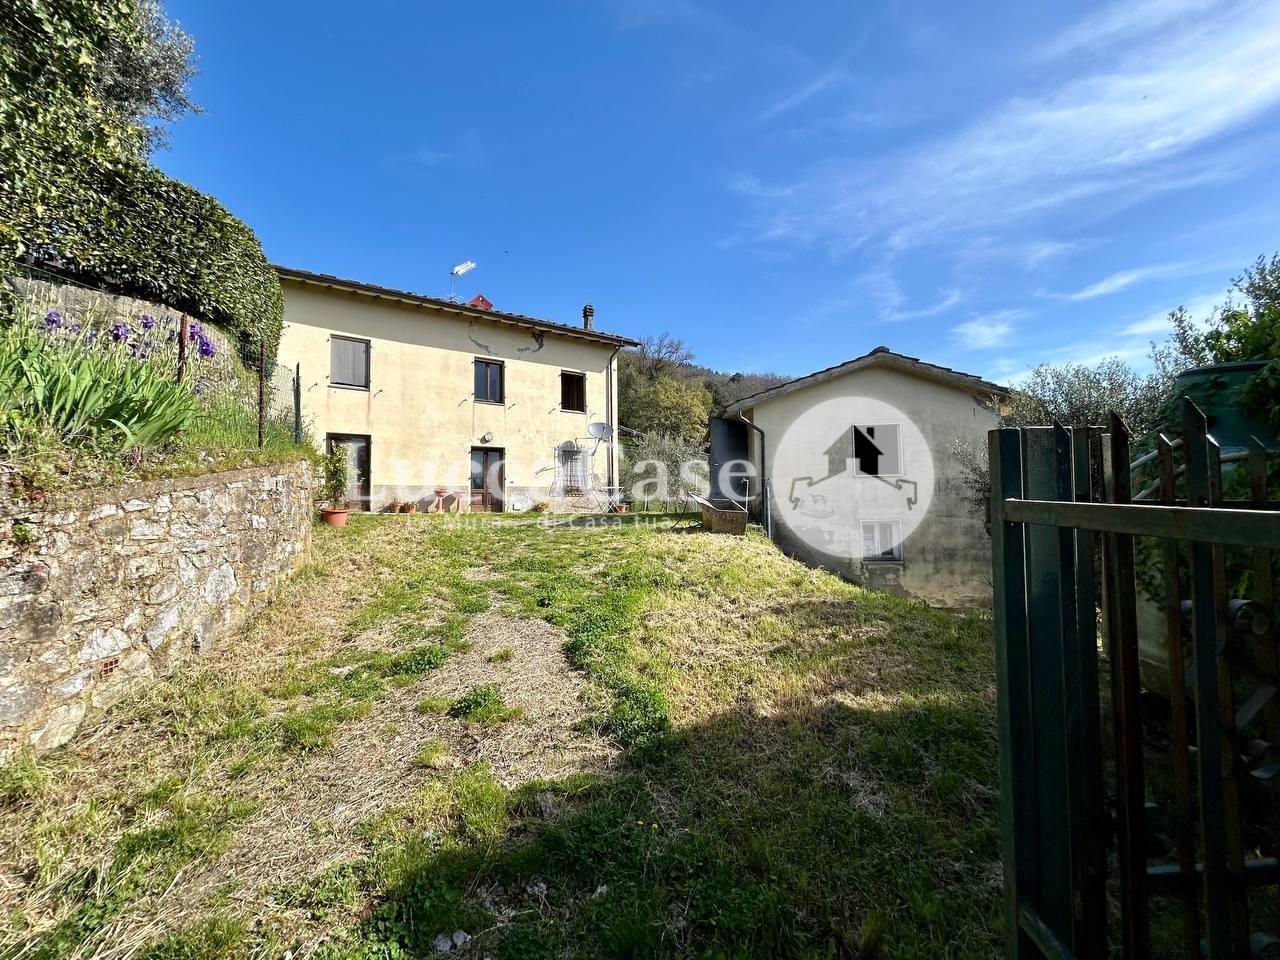 Single-family house for sale in Camaiore (LU)